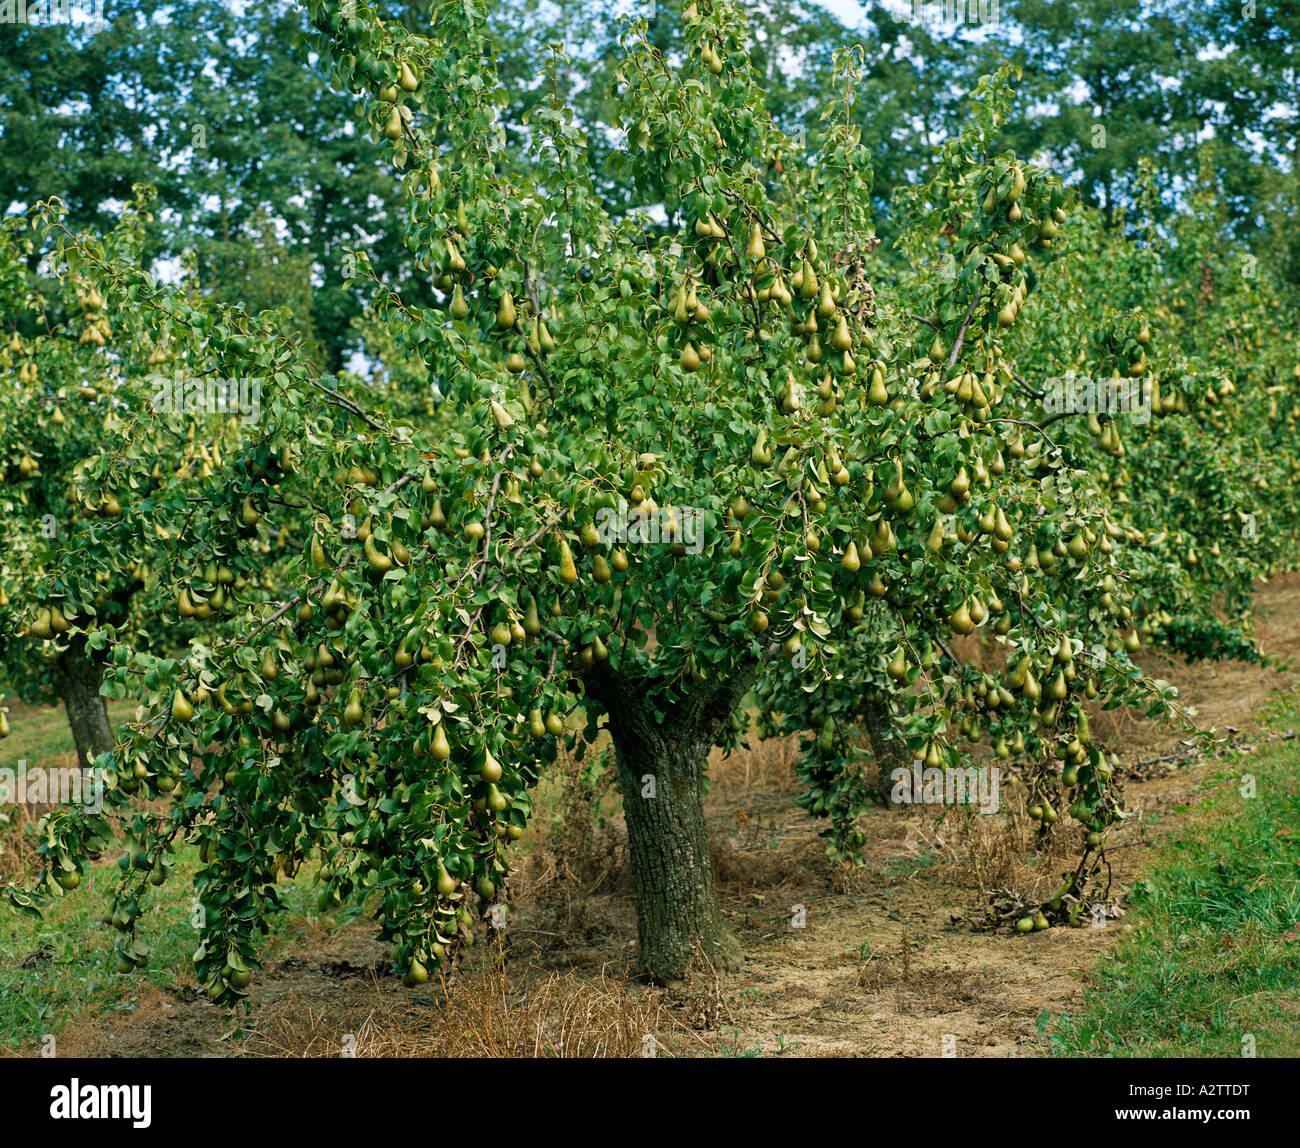 A Pear tree with ripe fruits ready for harvesting on a commercial orchard, Pyrus communis, Gloucestershire UK Stock Photo